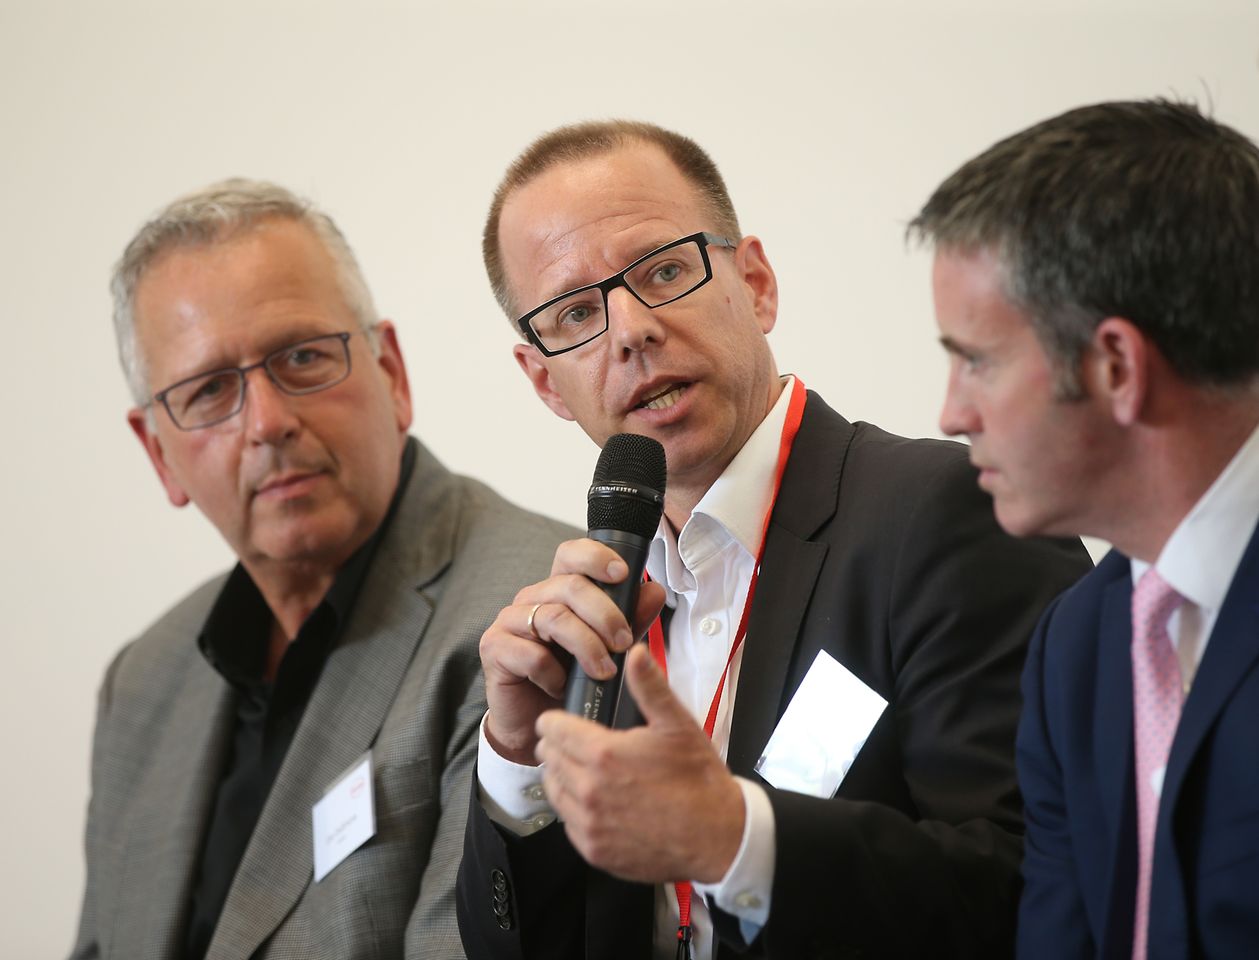 Kersten Heuser of Siemens during the panel discussion (to his right is Joe DeSimone of Carbon and to his right, Government Minister Damien English)